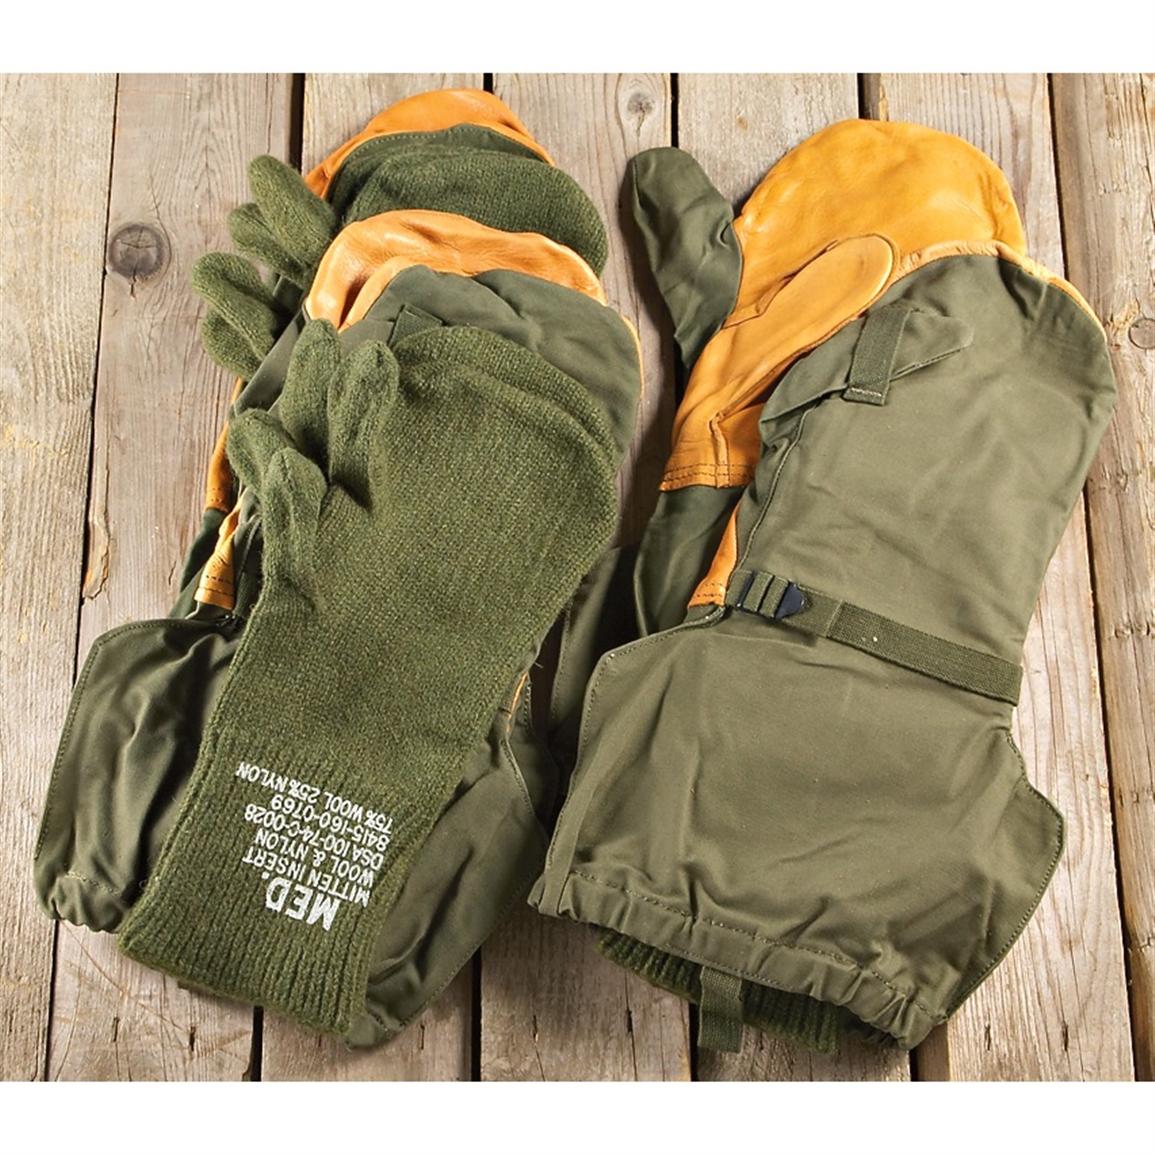 3 Prs. New U.S. Military Trigger Finger Mitts with Liners, Olive Drab